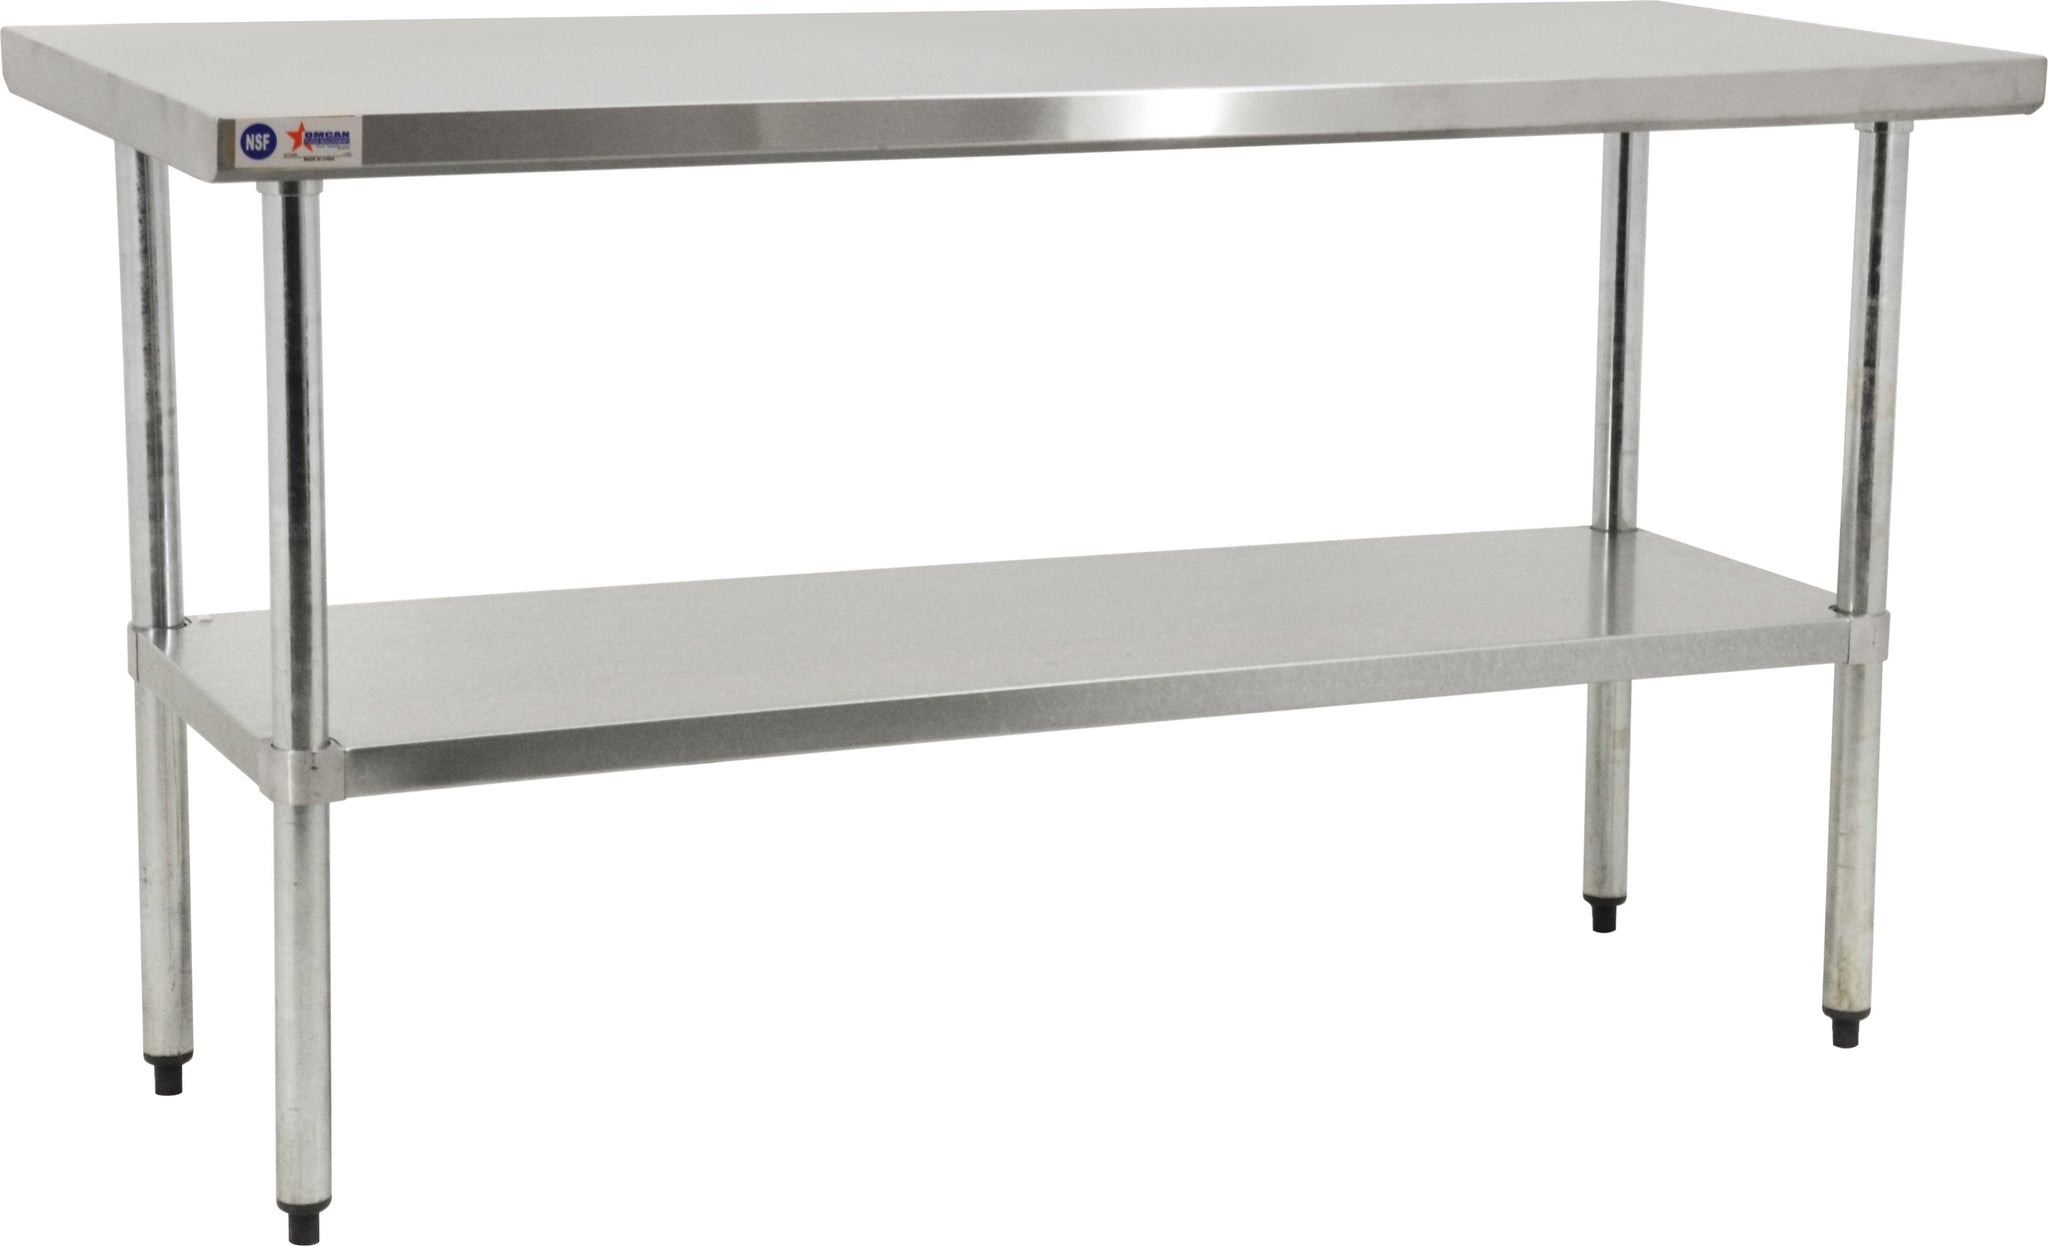 Omcan - 30” x 30” Stainless Steel Work Table - 19142